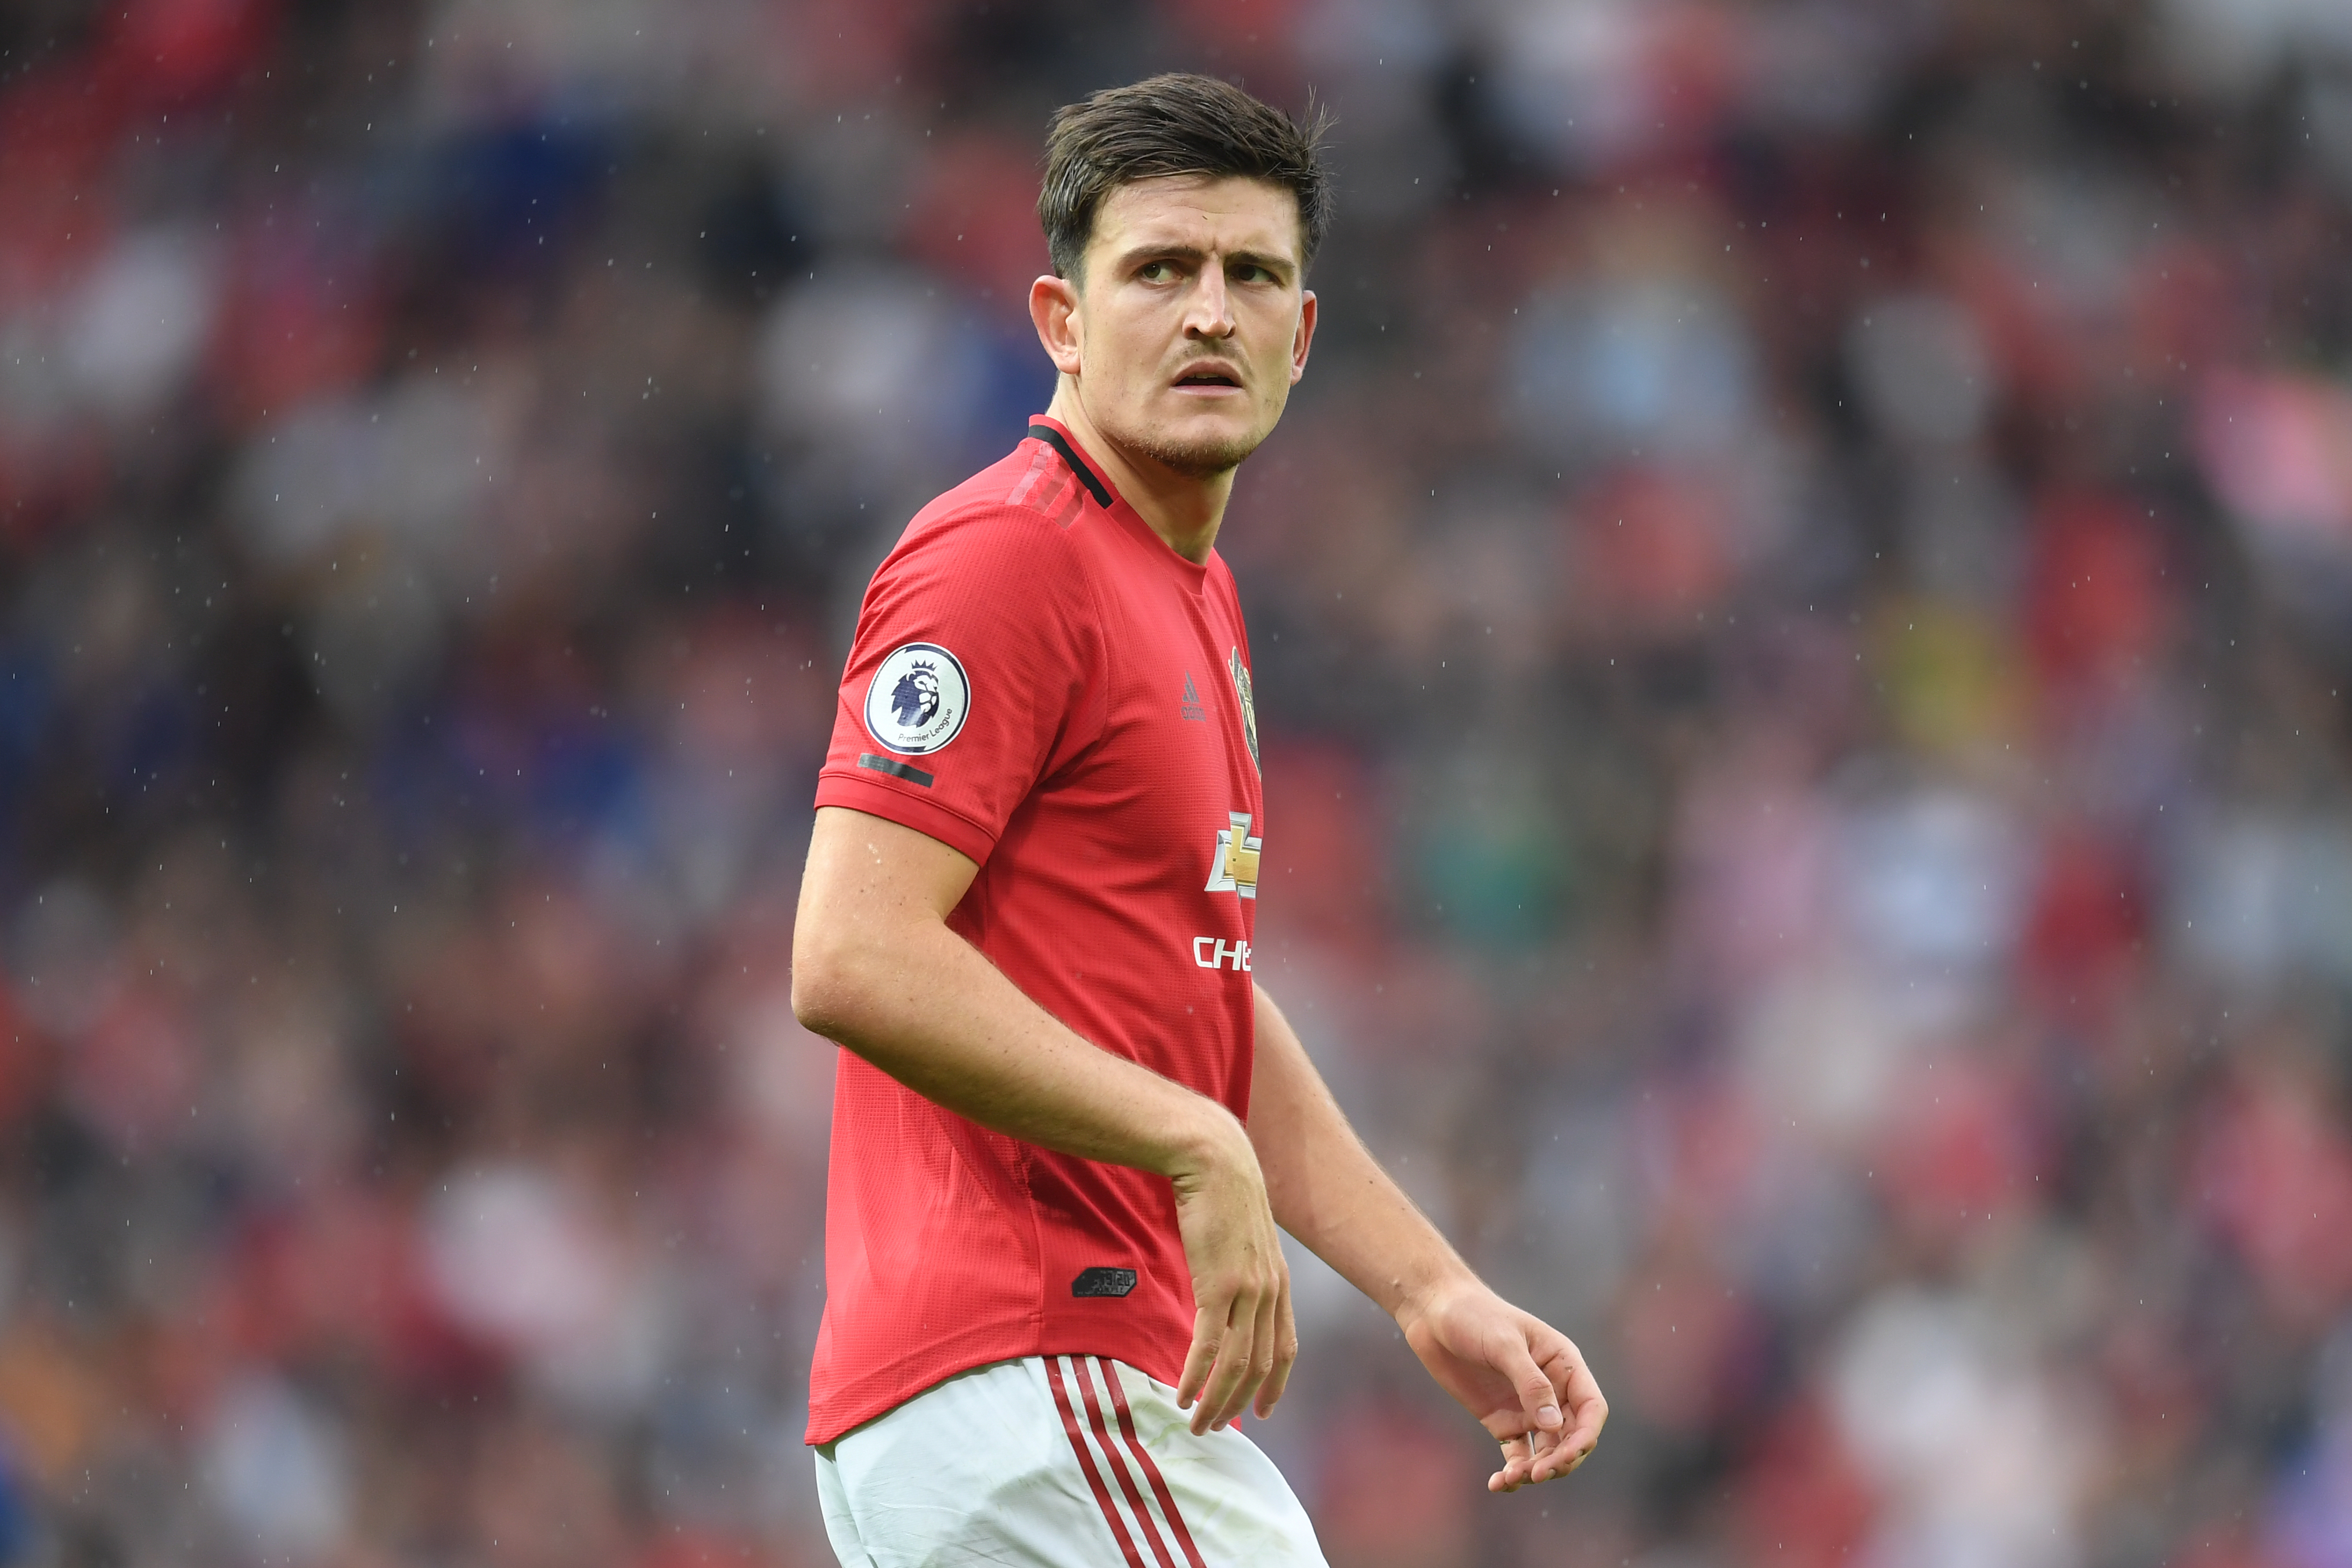 Top peformer Maguire recieved praise from former Manchester United boss Jose Mourinho. (Photo by Michael Regan/Getty Images)